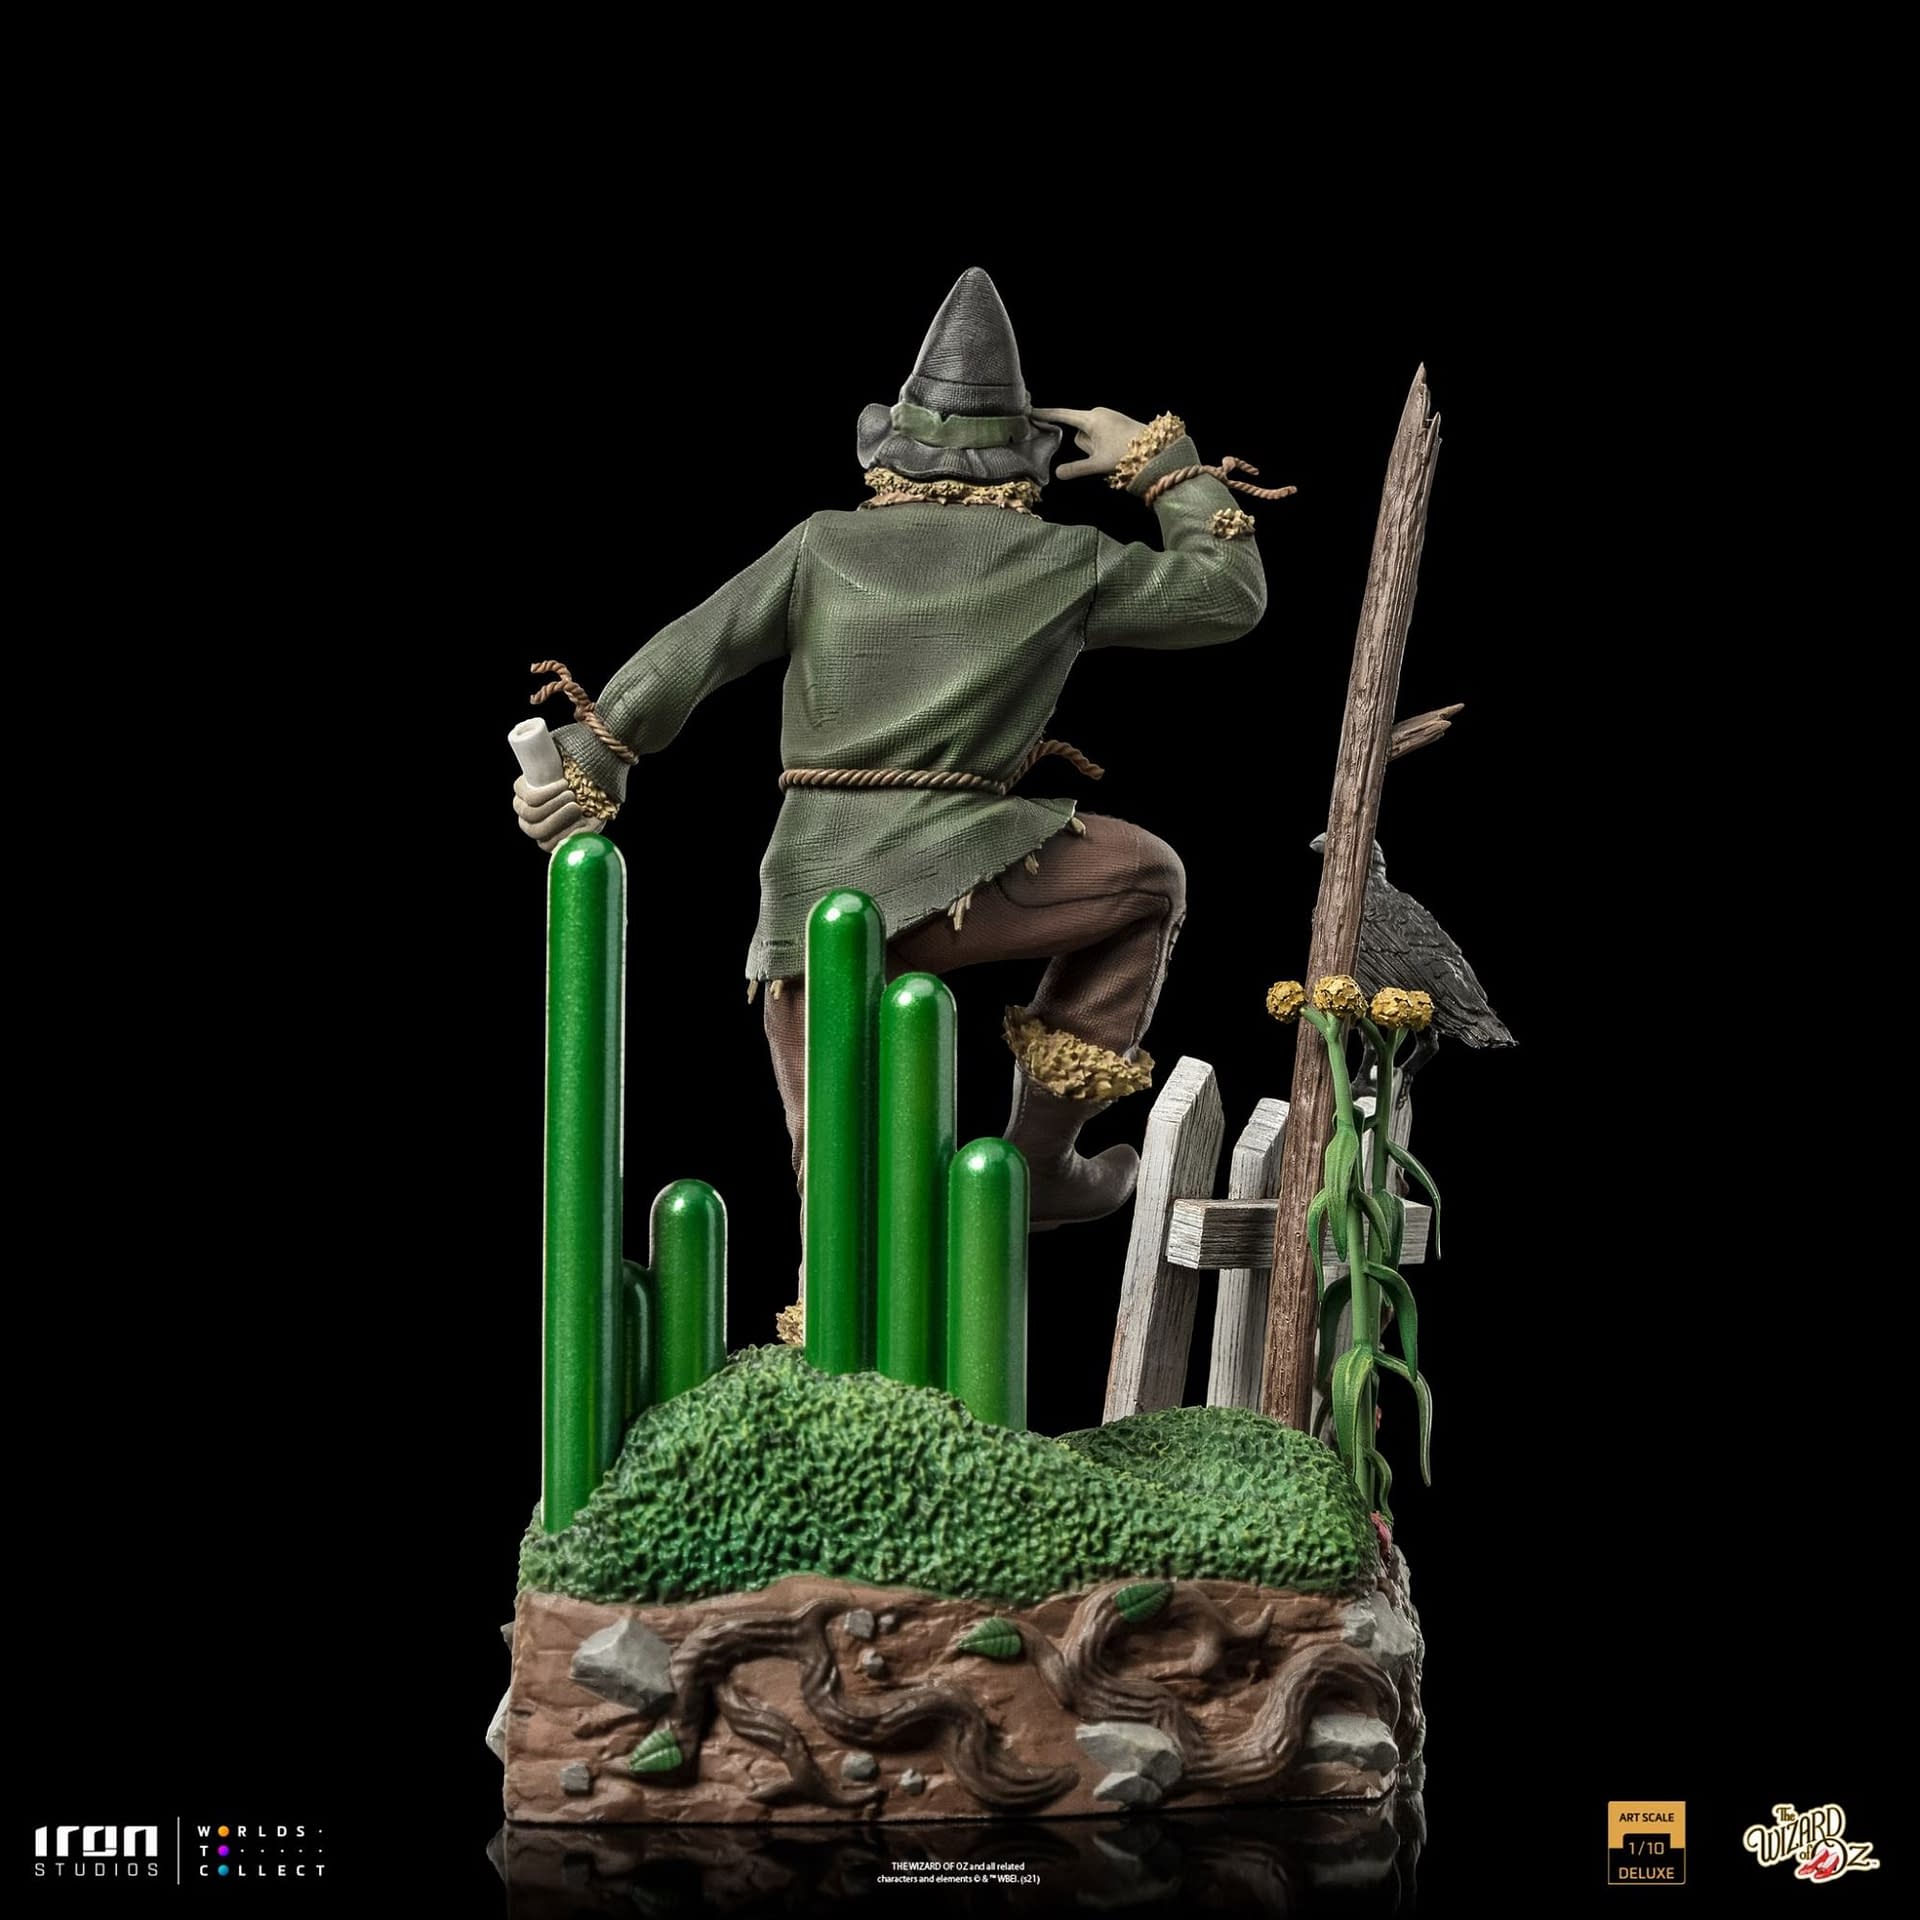 Iron Studios Reveals New The Wizard of Oz Statue with the Scarecrow